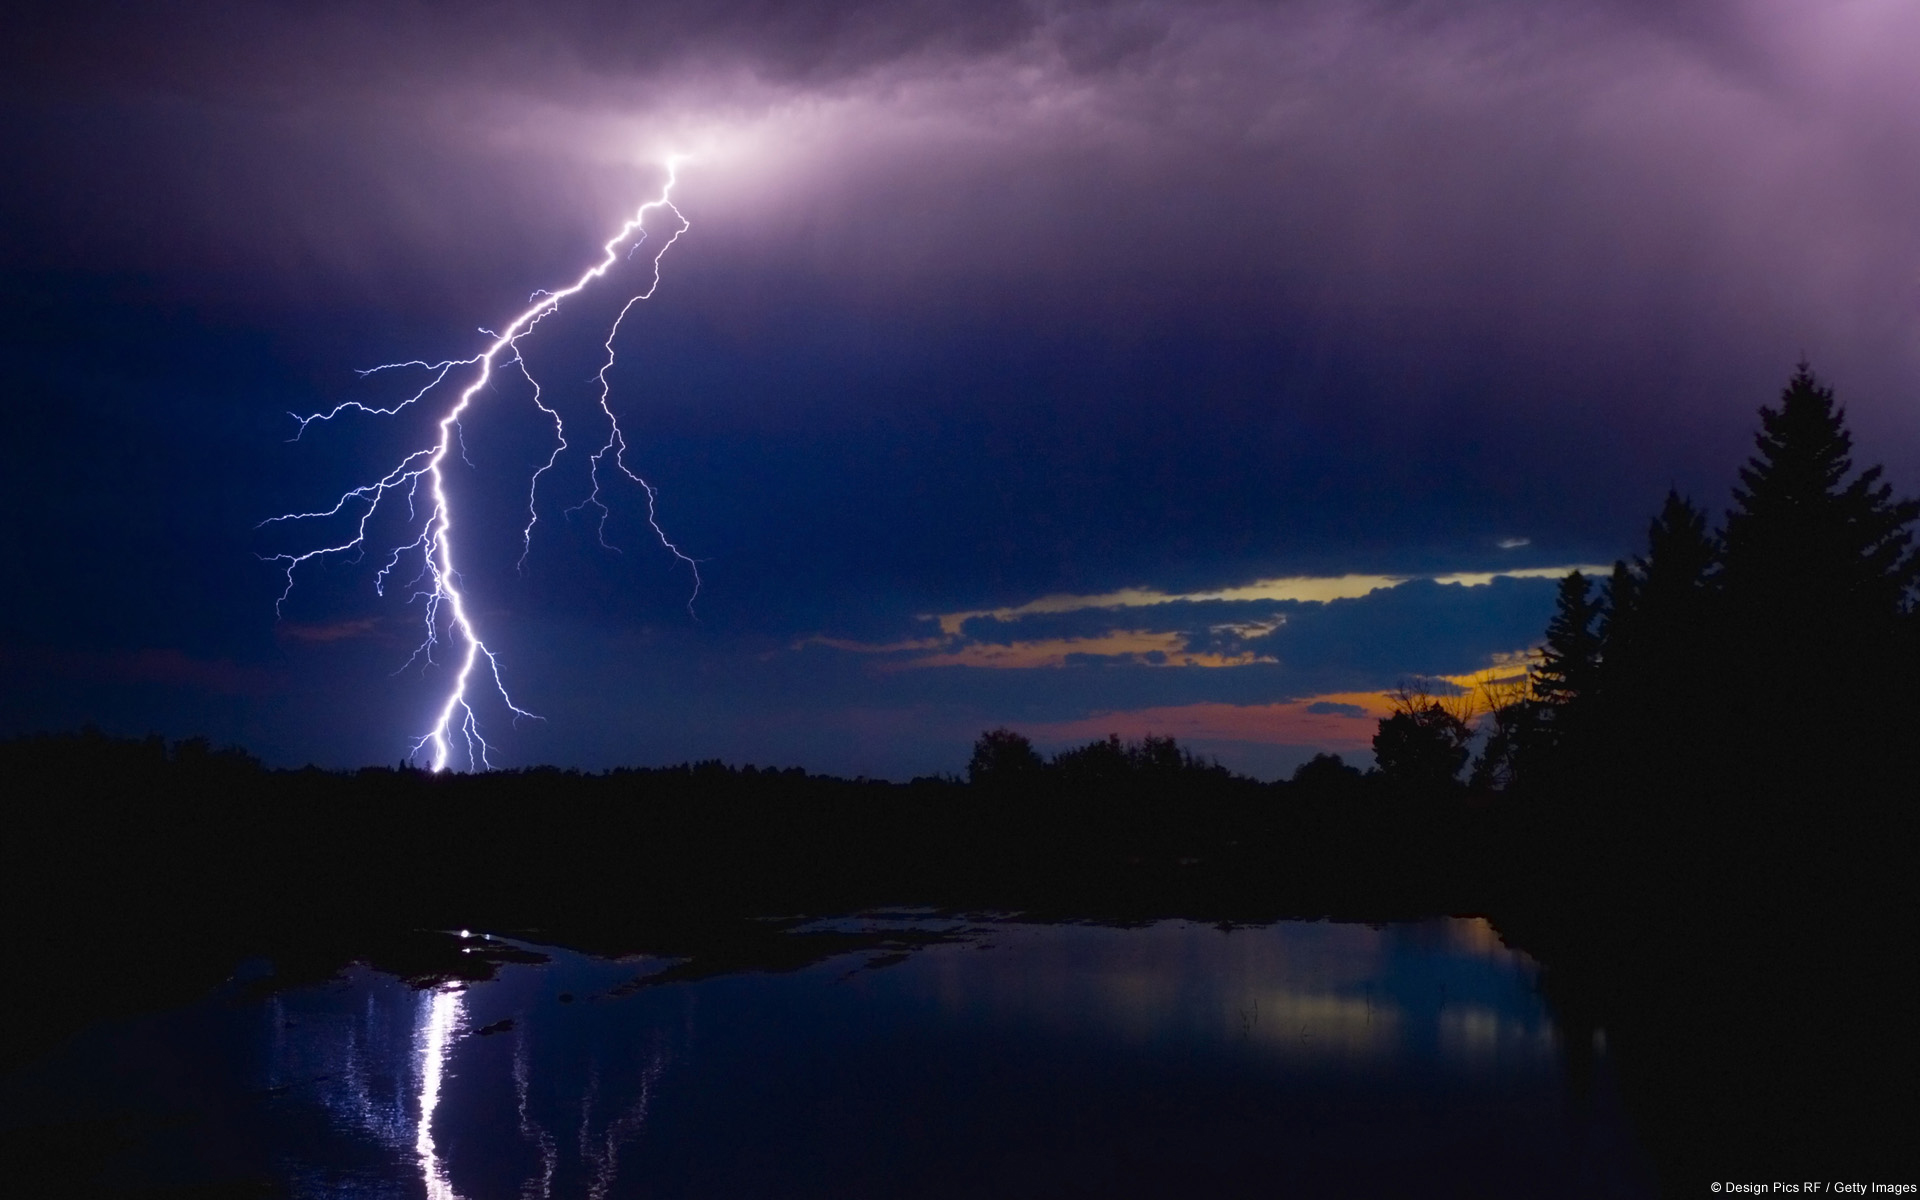 free wallpapers and themes,thunder,lightning,thunderstorm,sky,nature